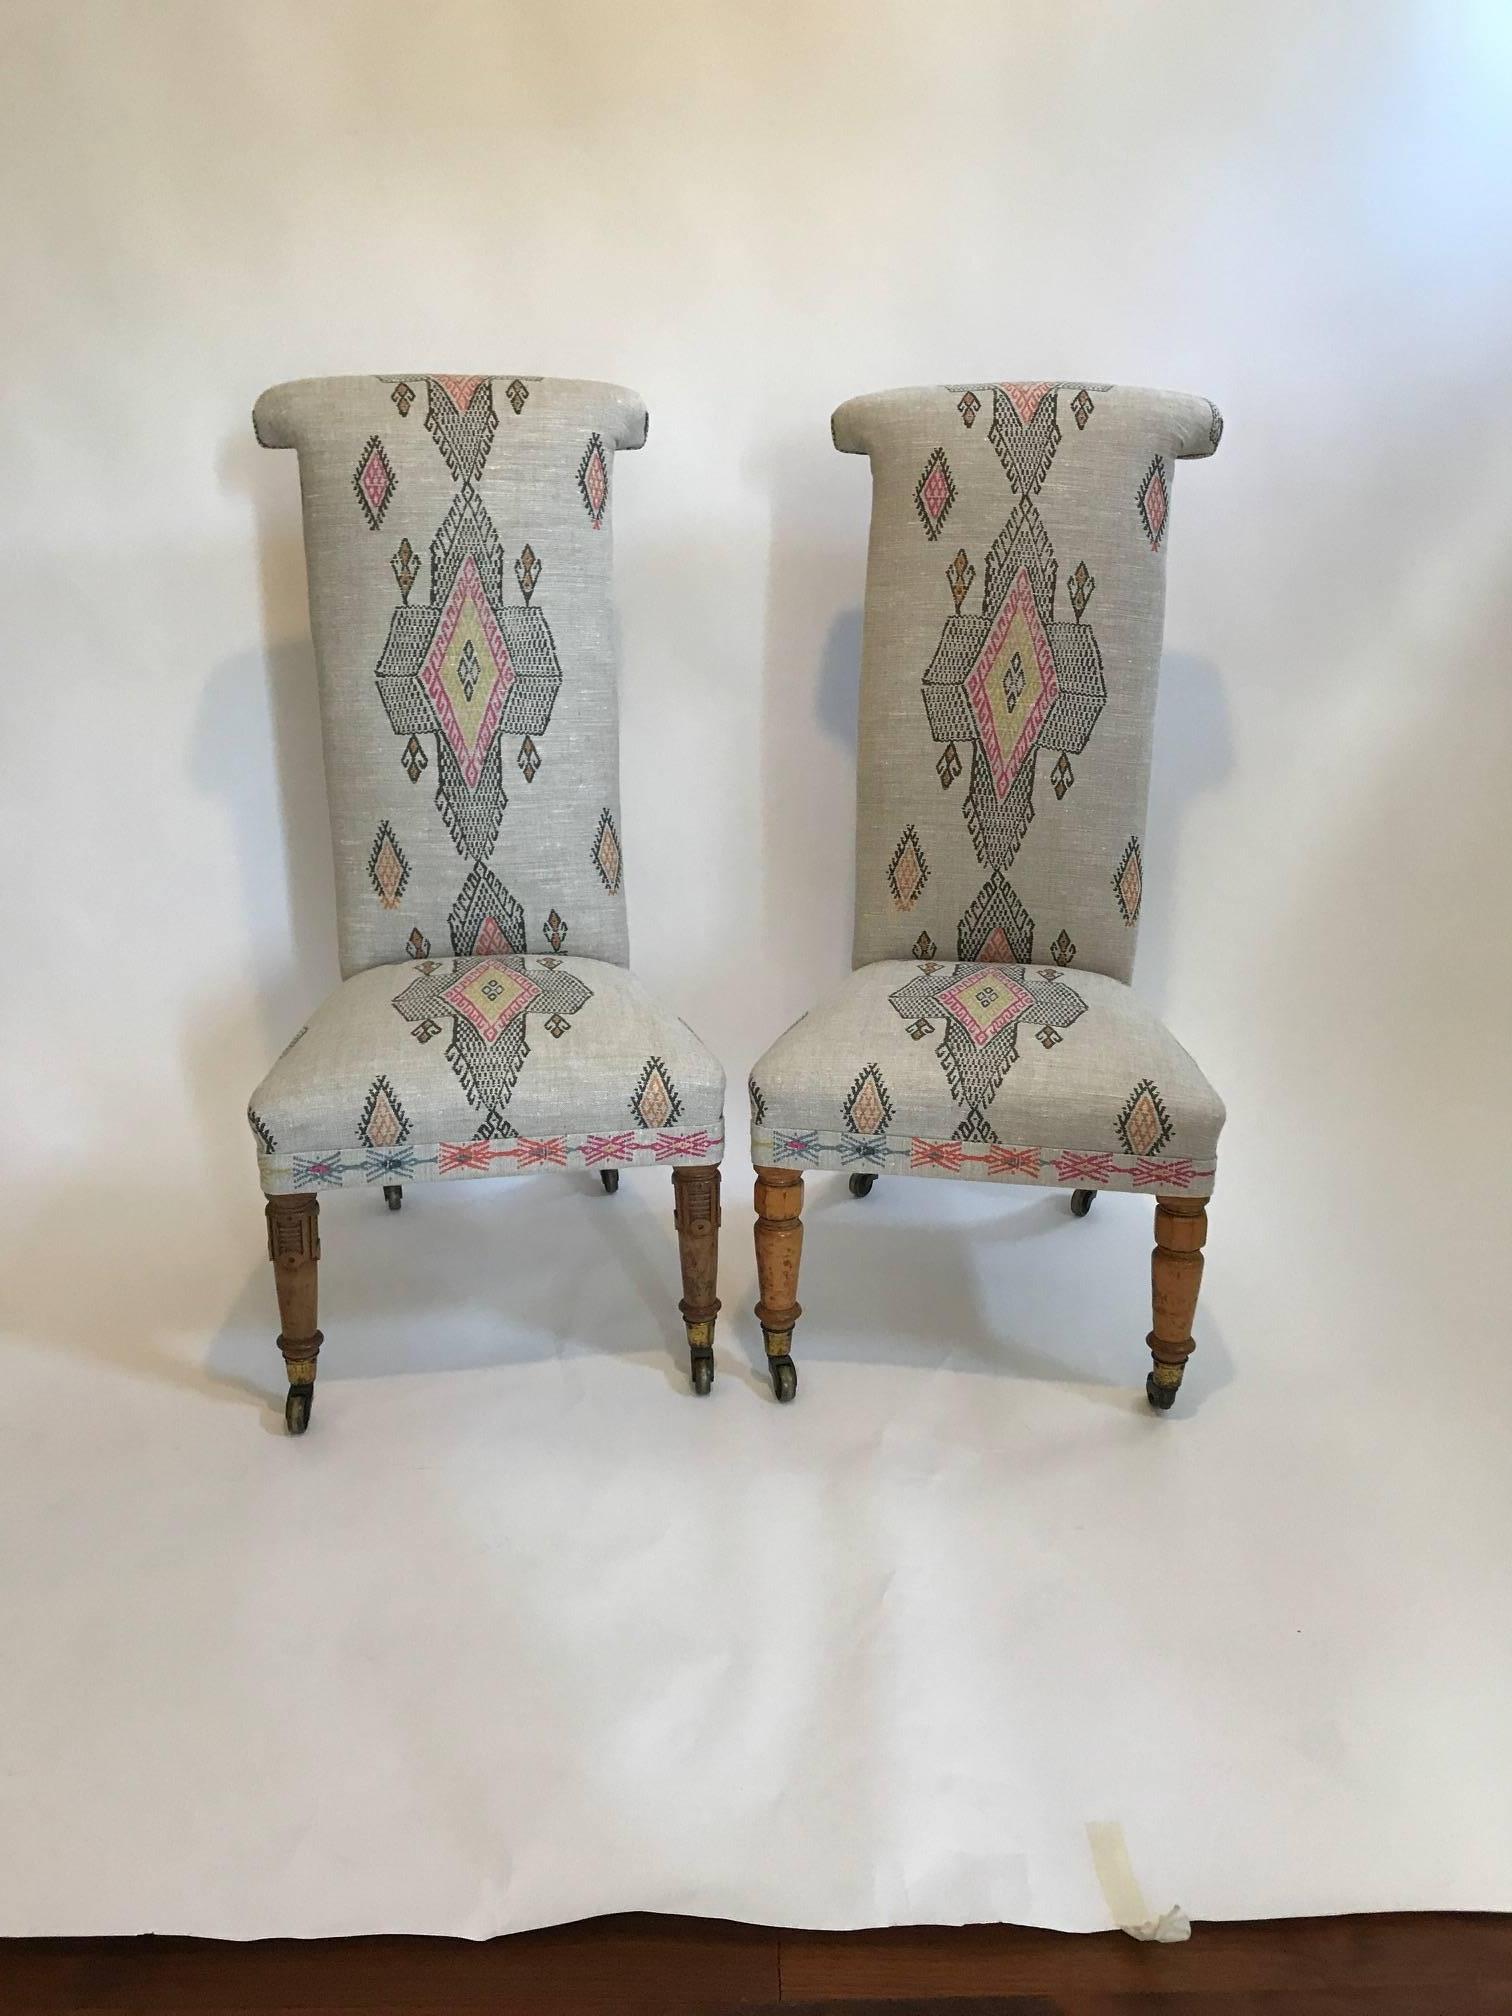 20th century English Victorian tall back nursing chairs reupholstered in Christopher Farr fabric, Traveling light, designed by Kit Kemp.
Backs of the chairs are covered in a dark brown linen with polished nickel nailheads around perimeter of